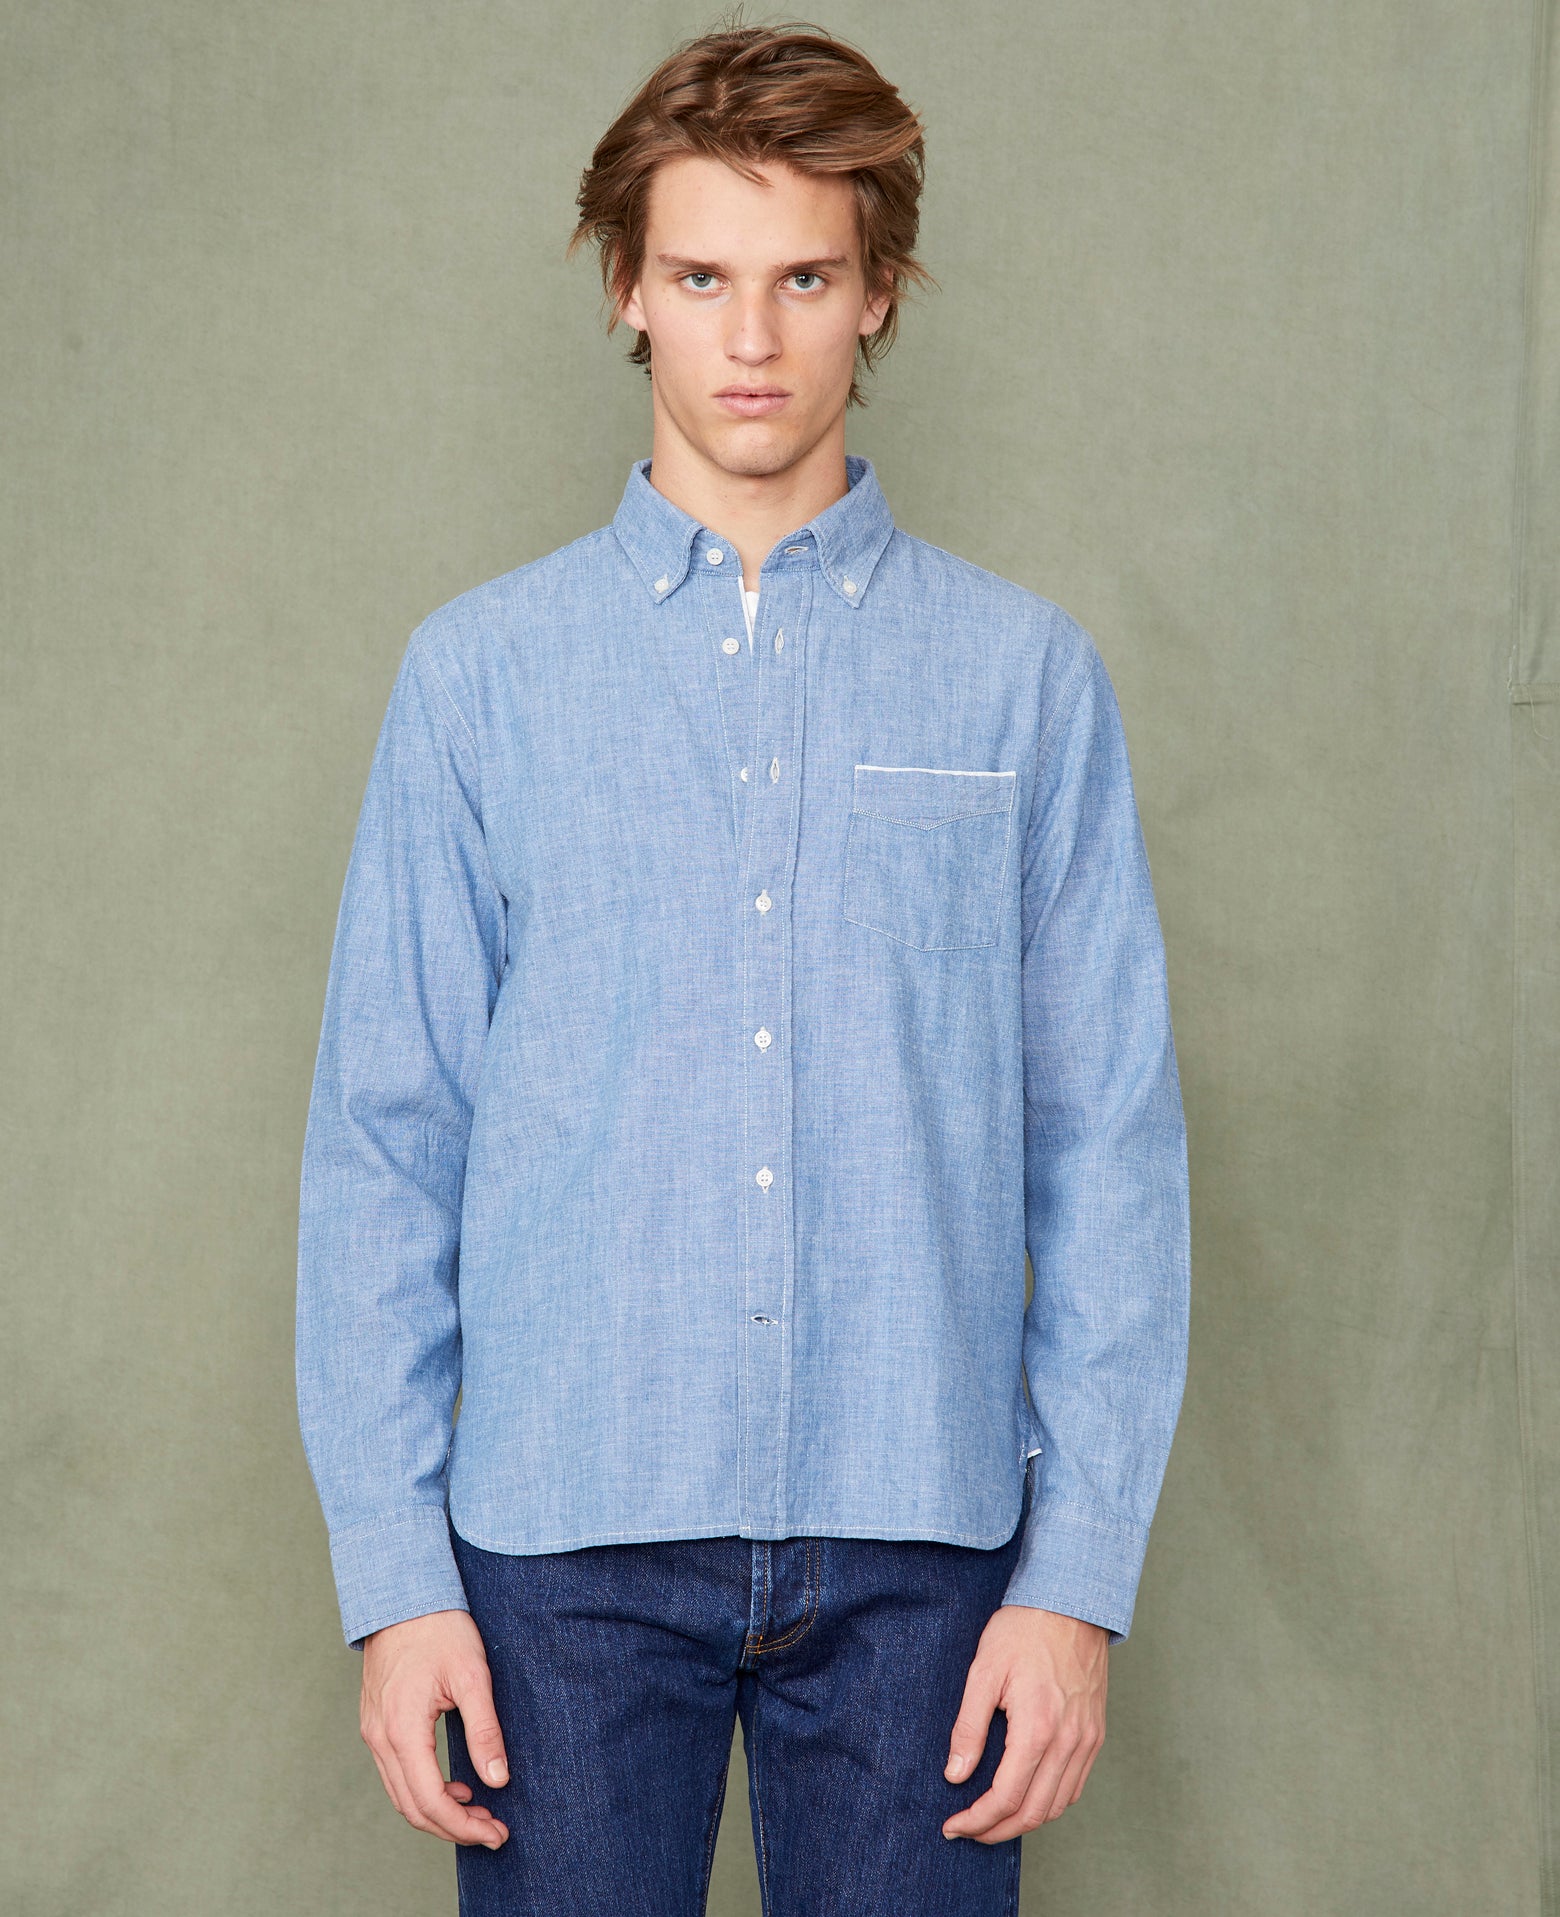 New button down shirt - Image 3